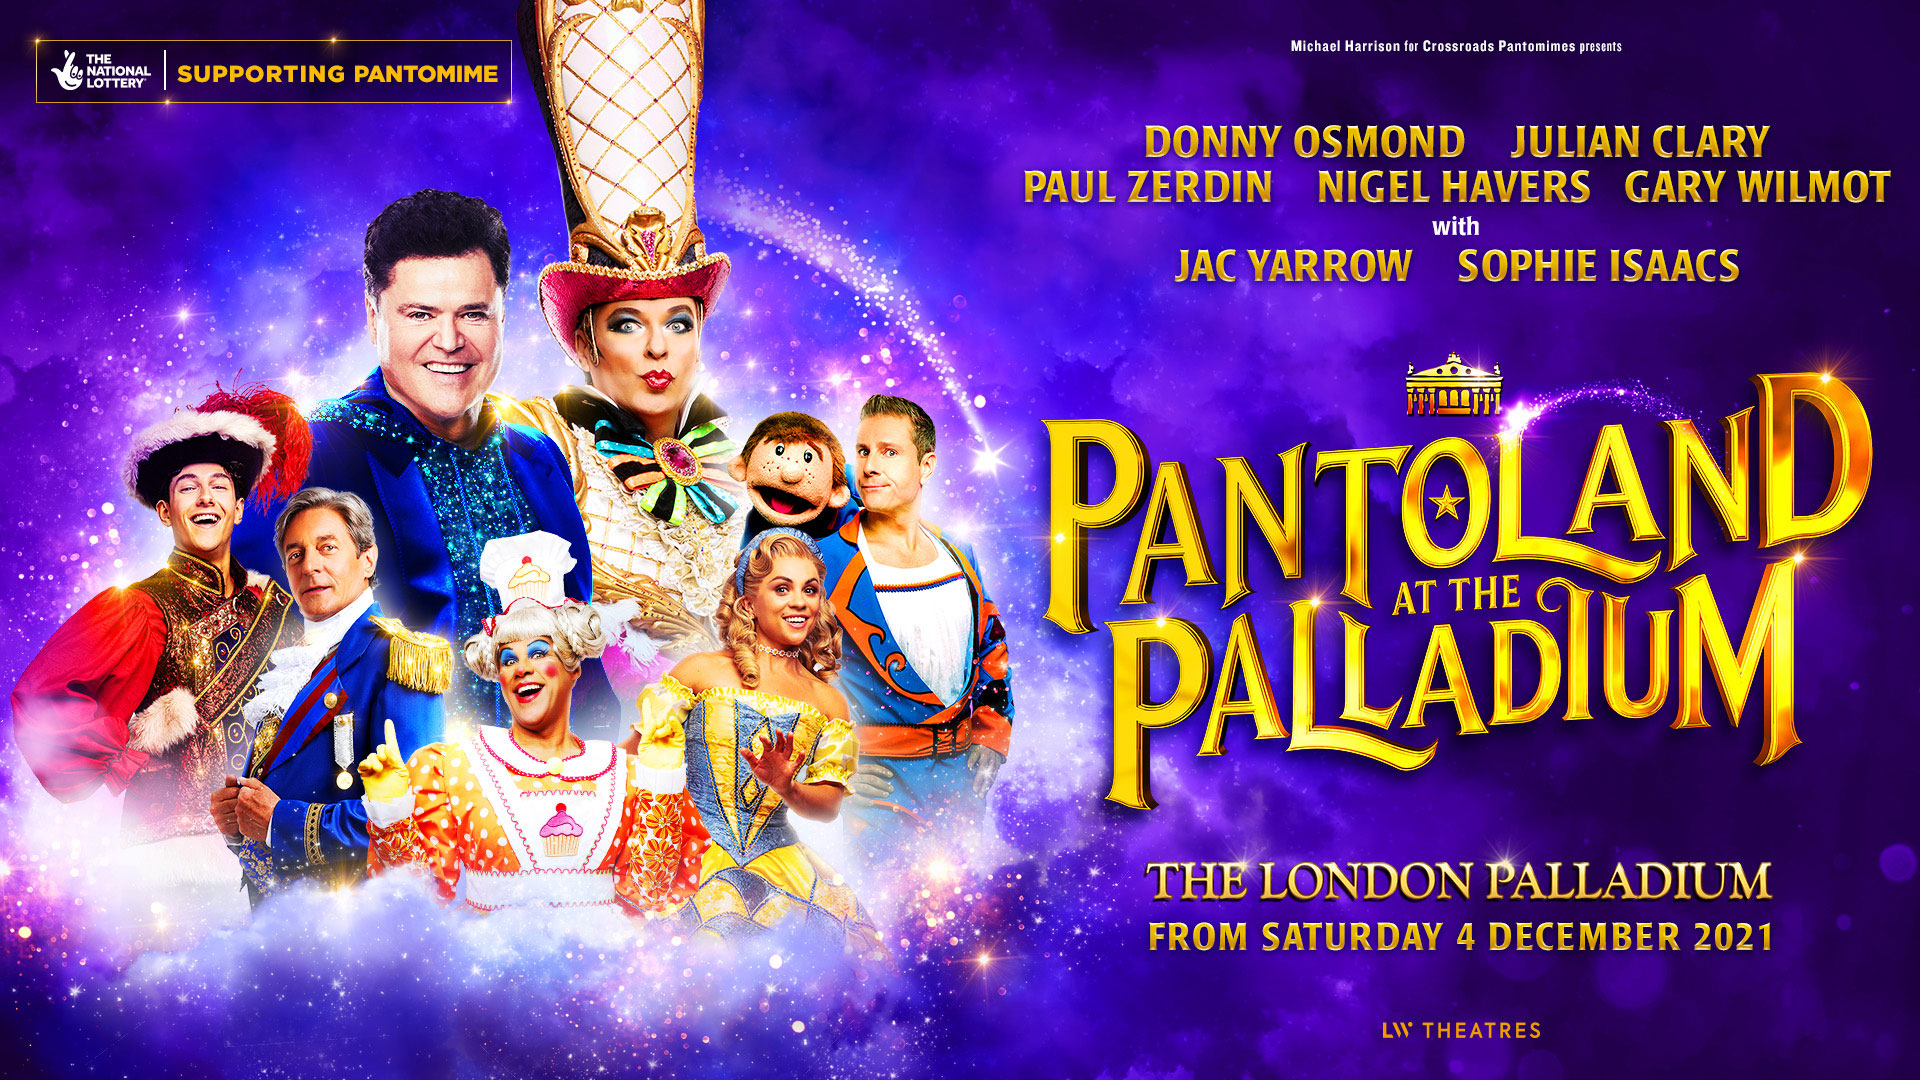 Micheal Harrison for Crossroads Pantomimes Presents DONNY OSMOND, JULIAN CLARY, PAUL ZERDIN, HIGEL HAVERS, GARY WILMOT, with JAC YARROW and SOPHIE ISAACS PANTOLAND AT THE PALLADIUM The London Palladium from Saturday 4 December 2021 LW Theatres